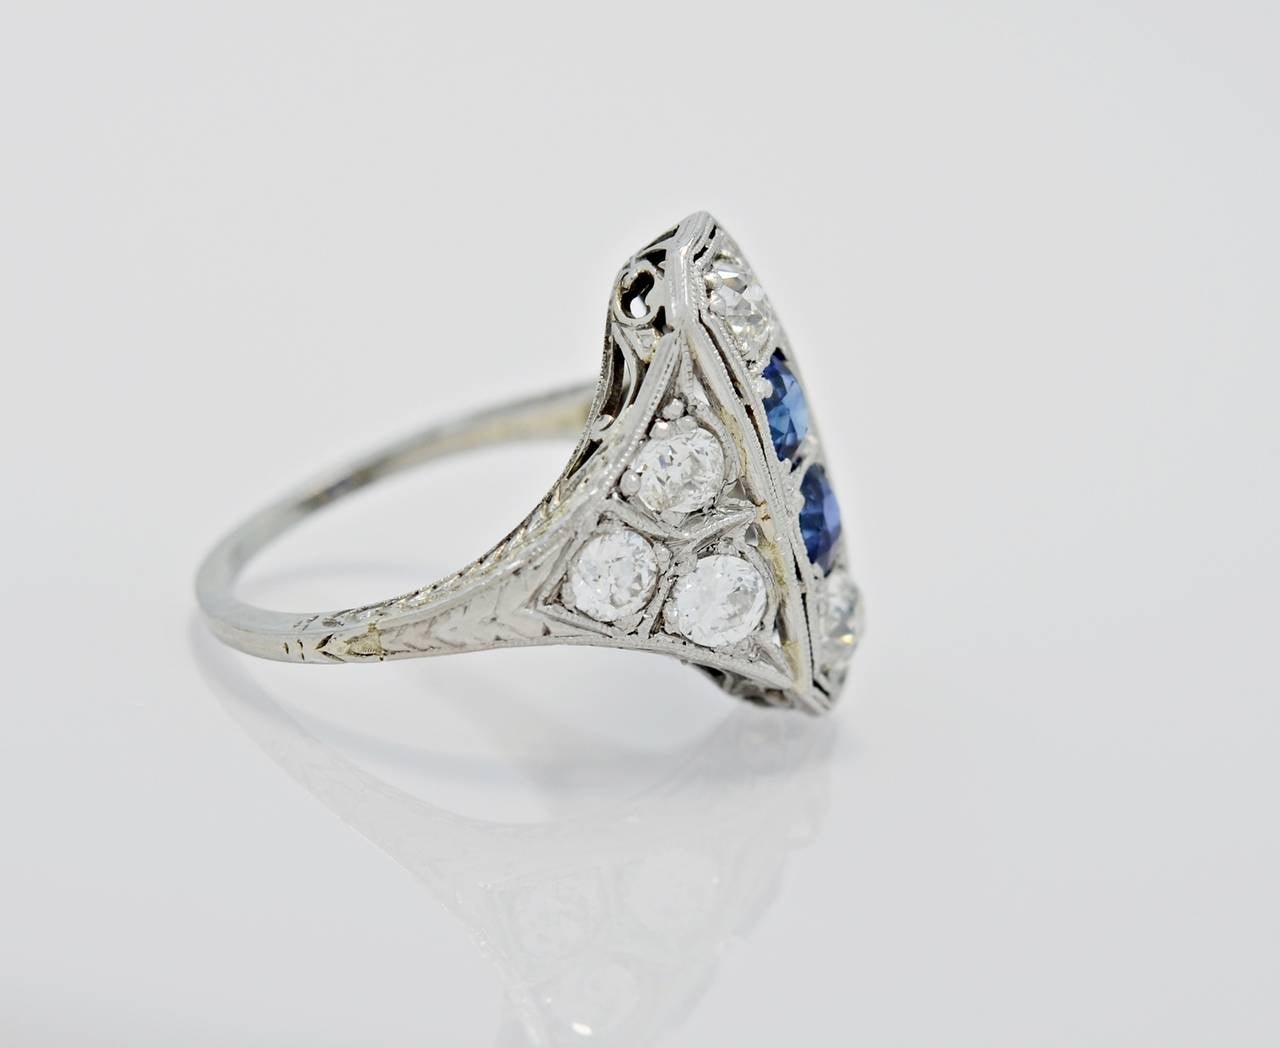 This is an elegant Art Deco fashion ring featuring scintillating 1.05ct. apx. T.W. European cut diamonds and .75ct. apx. T.W. of brilliant blue sapphires. This very special ring has beautiful millegrain bead work encircling the center diamonds and